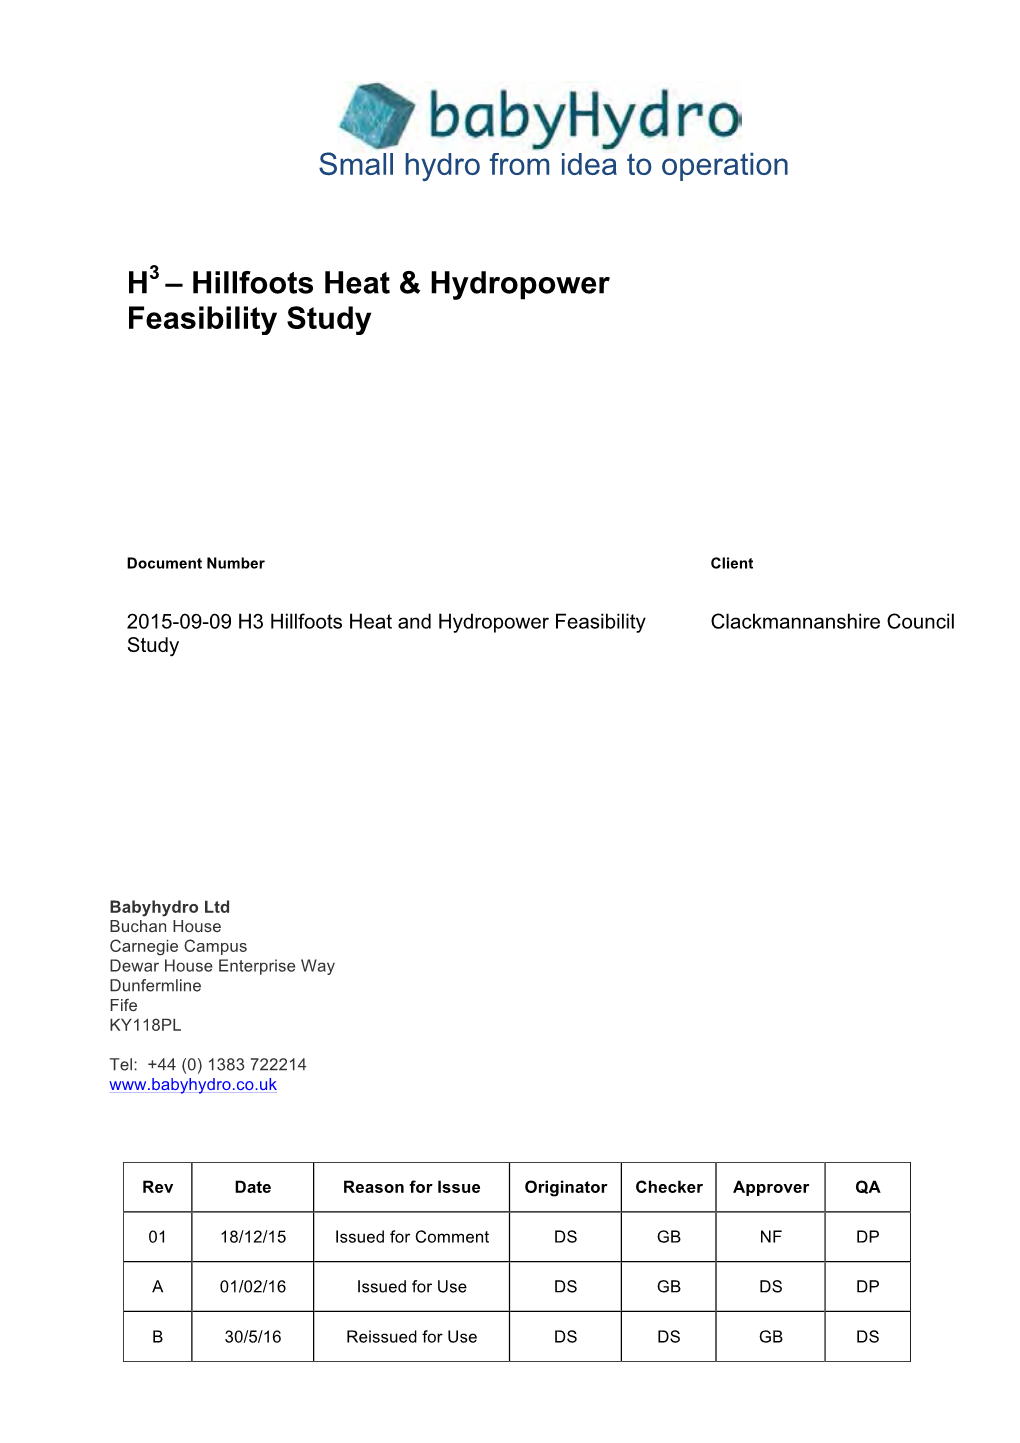 Hillfoots Heat & Hydropower Feasibility Study